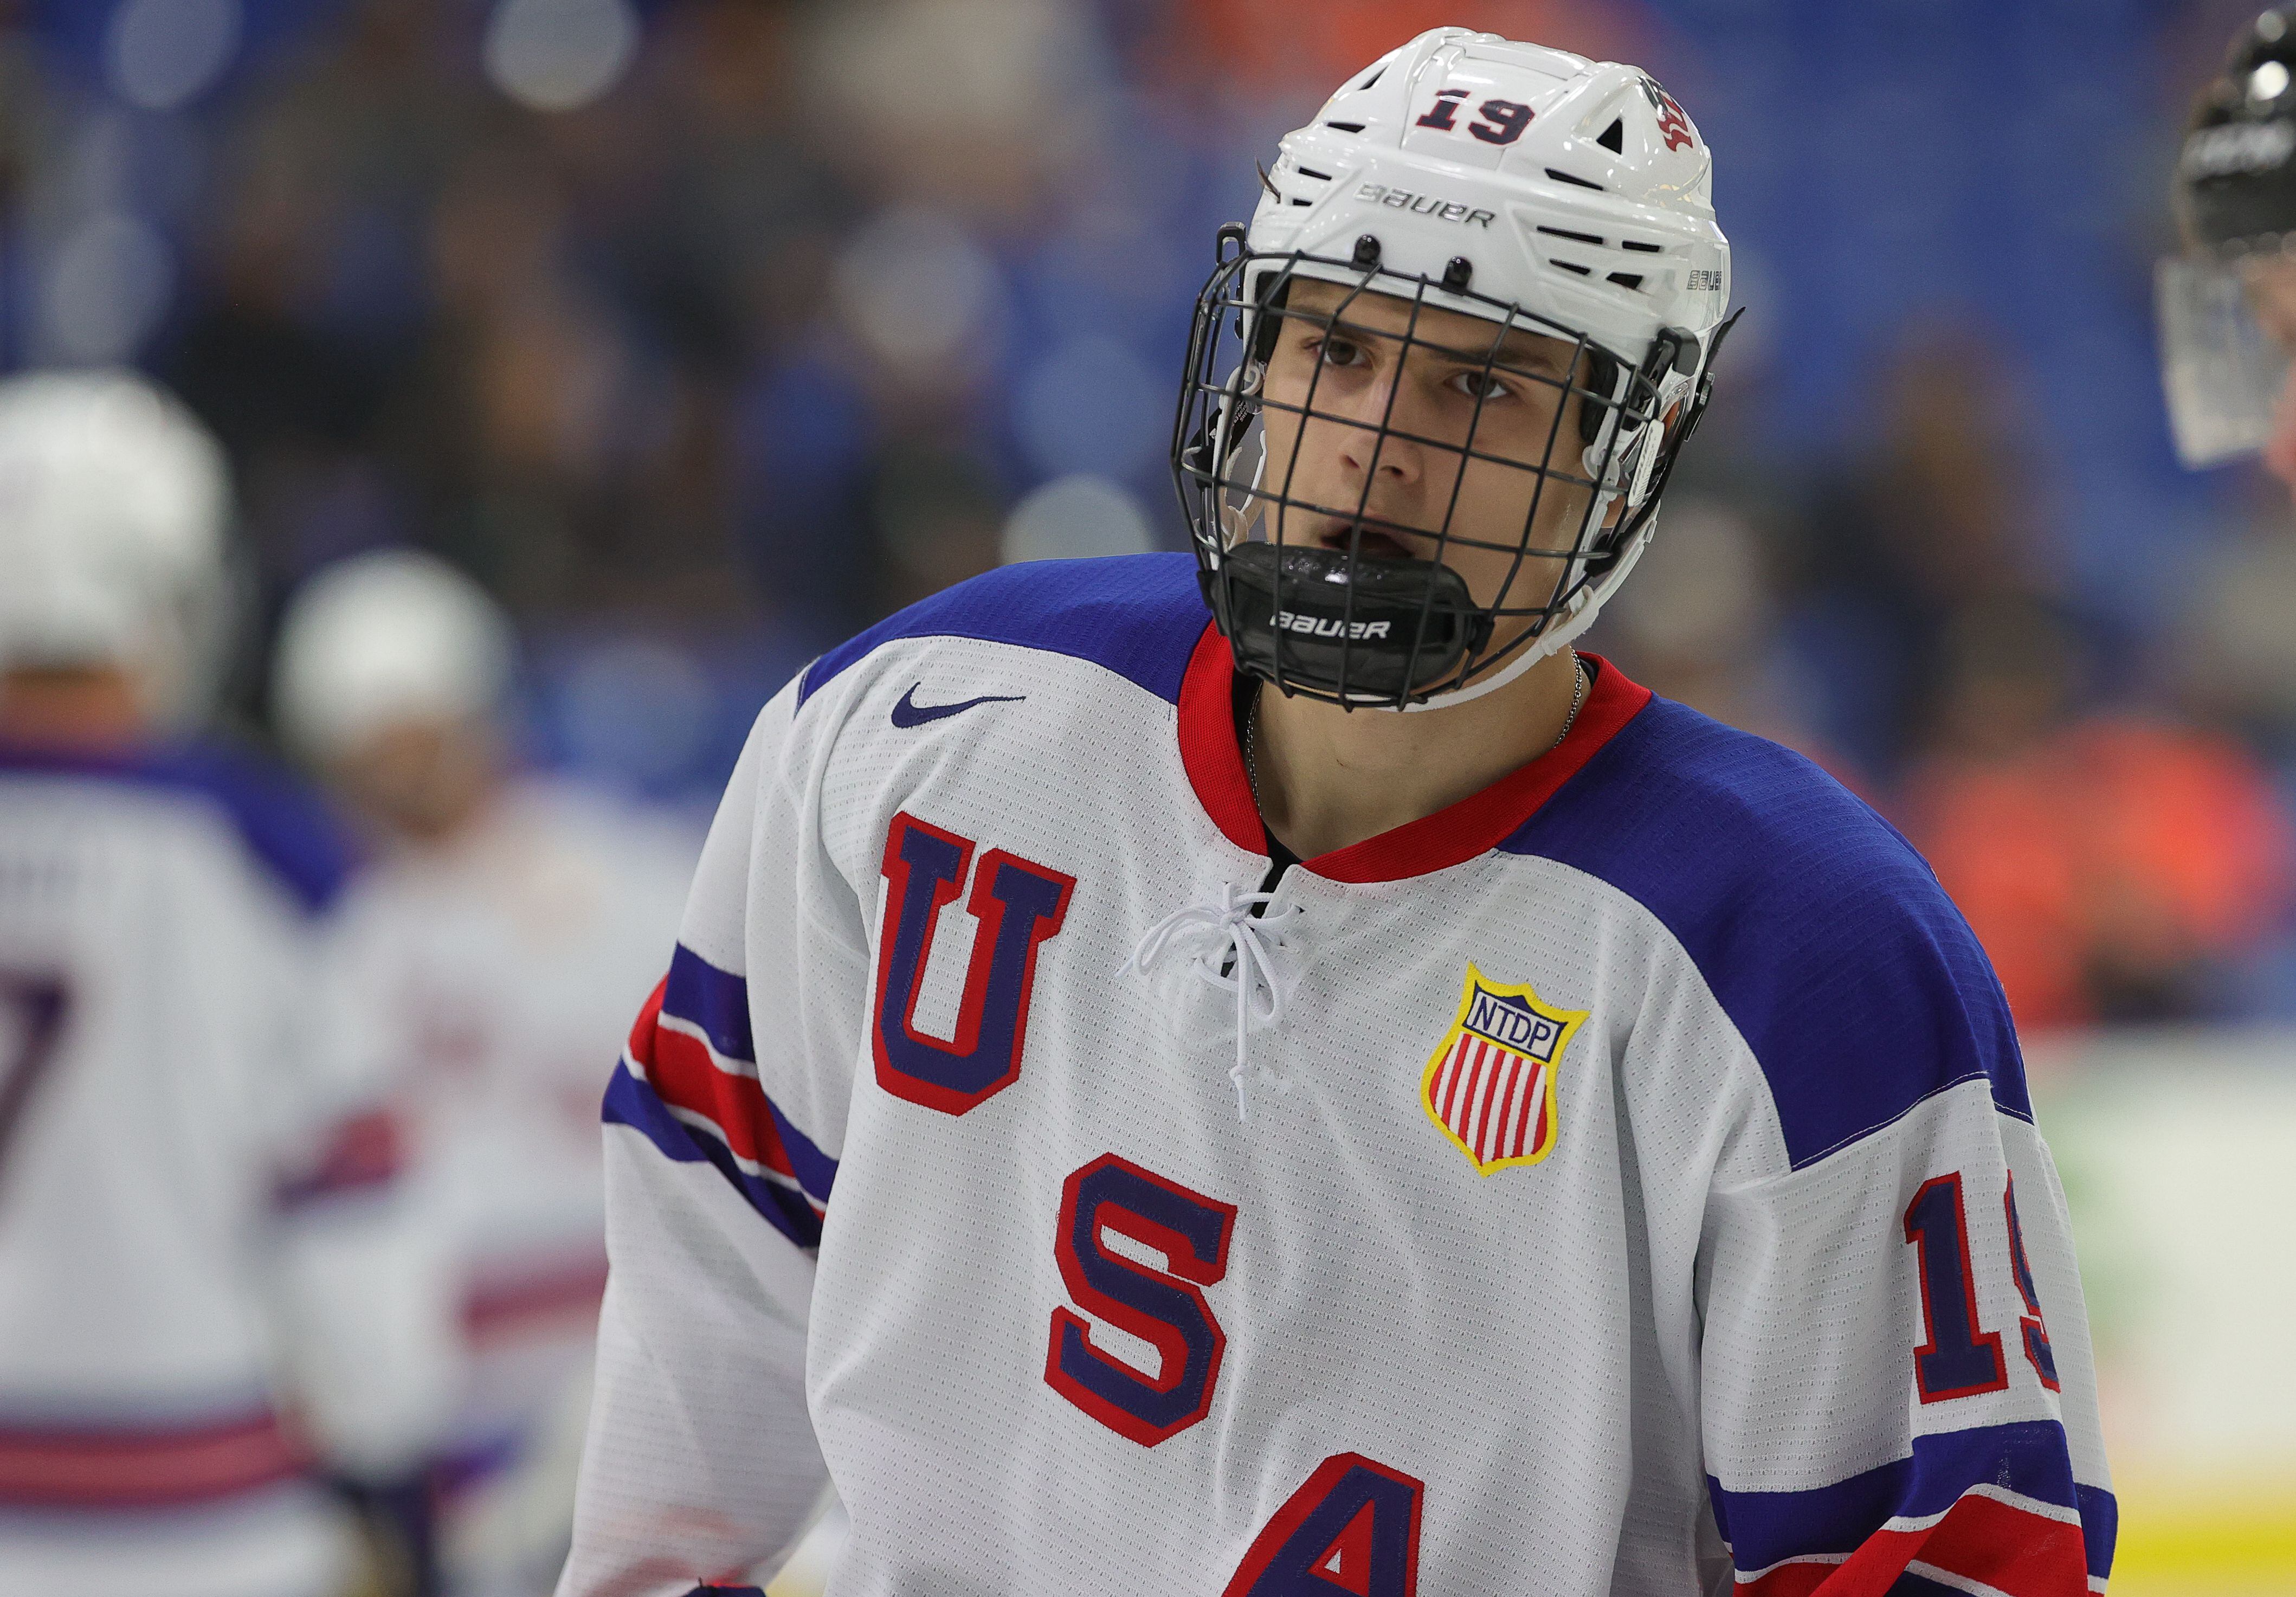 2022 NHL draft profile: Cutter Gauthier, a riser who should have Flyers'  attention – NBC Sports Philadelphia